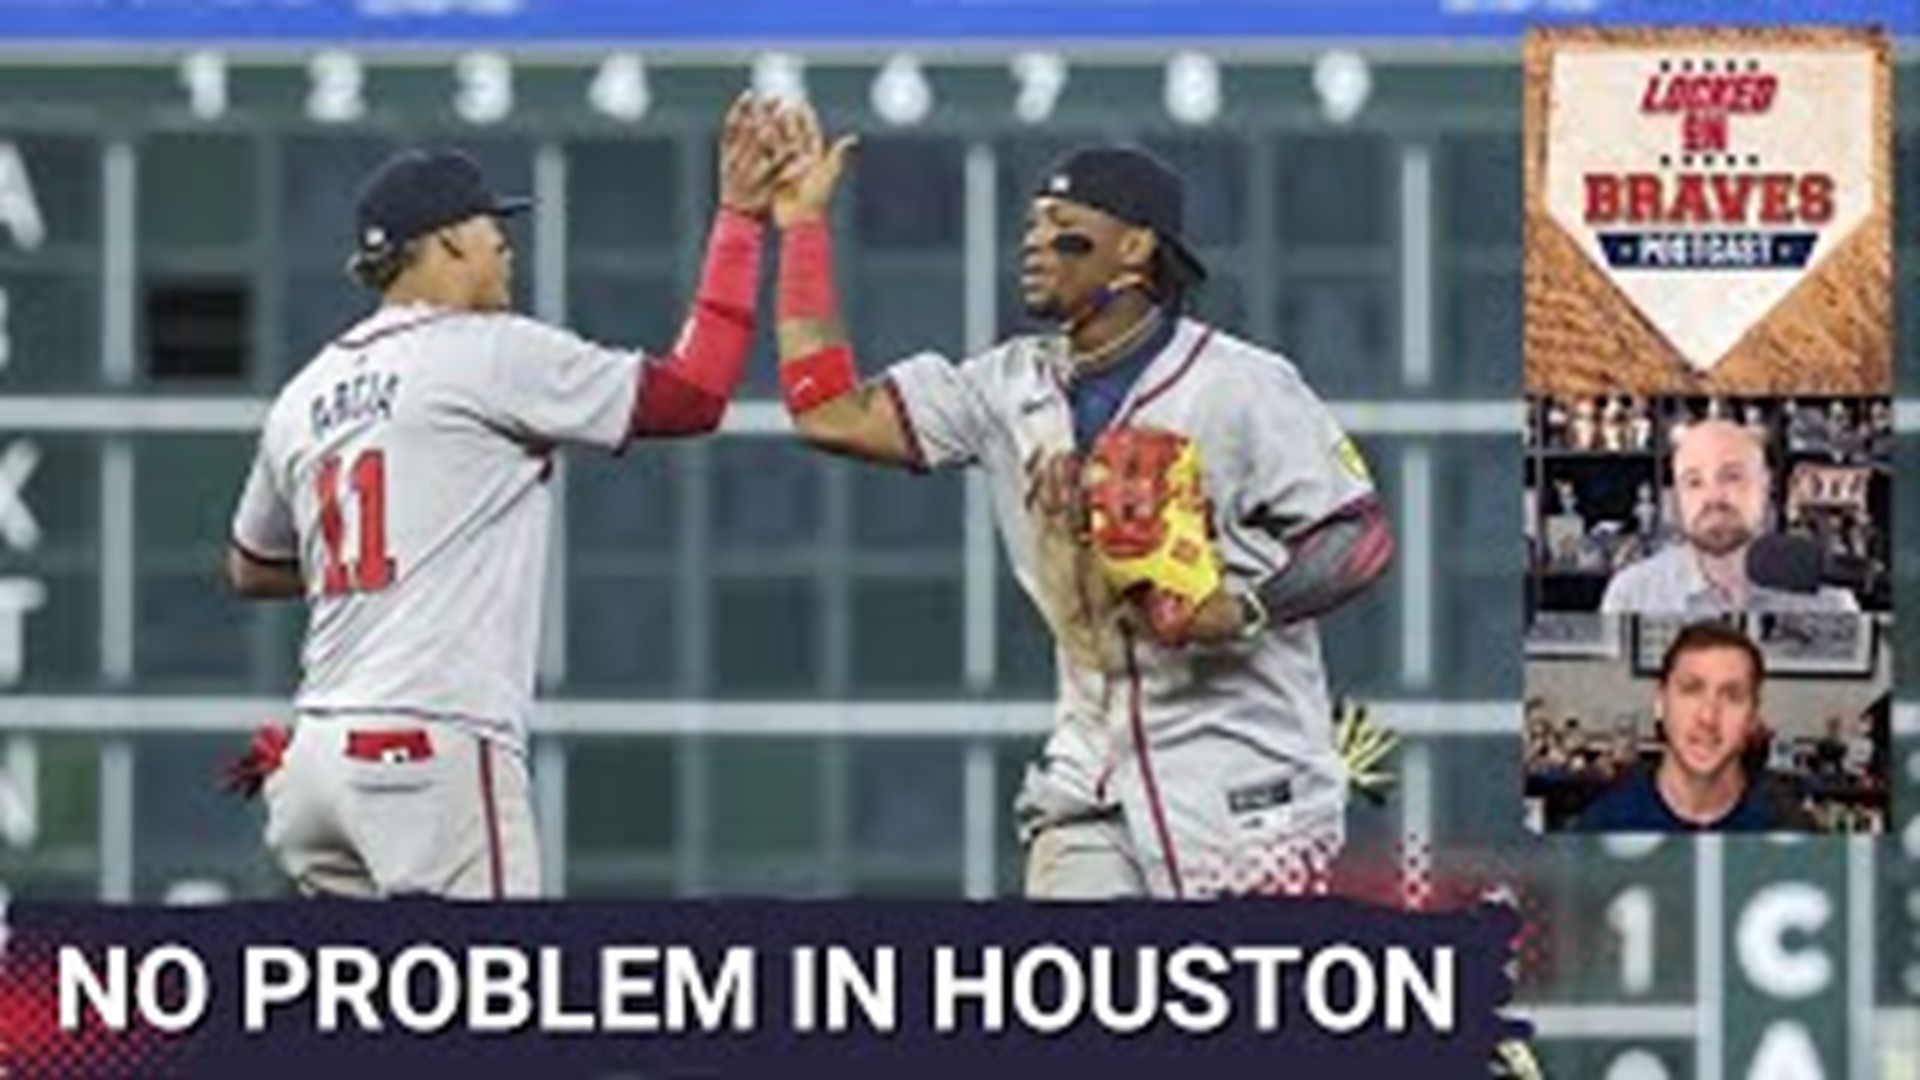 The Atlanta Braves got another great start from Reynaldo Lopez and more than enough offense to hand the Houston Astros a 6-2 defeat on Tuesday at Minute Maid Park.